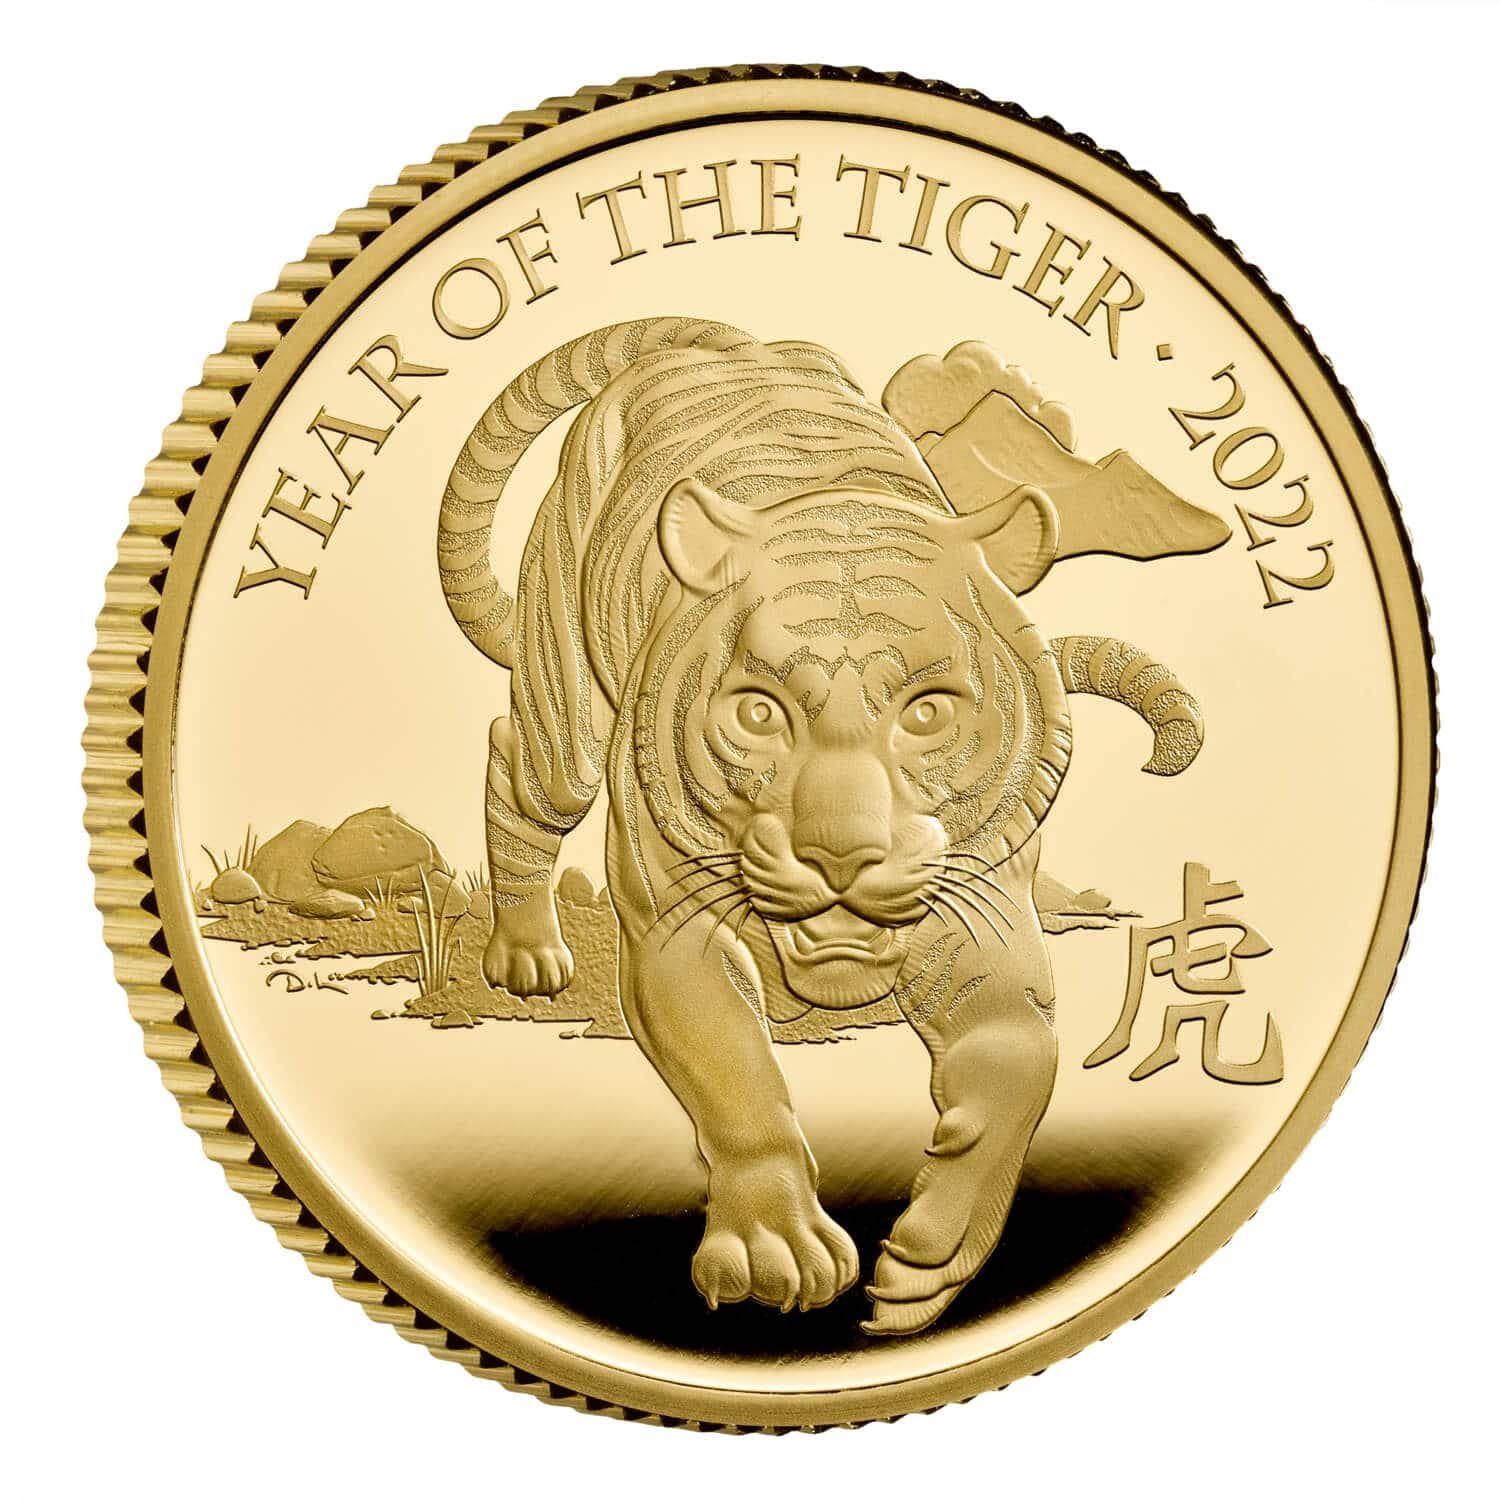 lunar-tiger-coin-2022-royal-mint-chinese-new-year-of-tiger-silver-gold